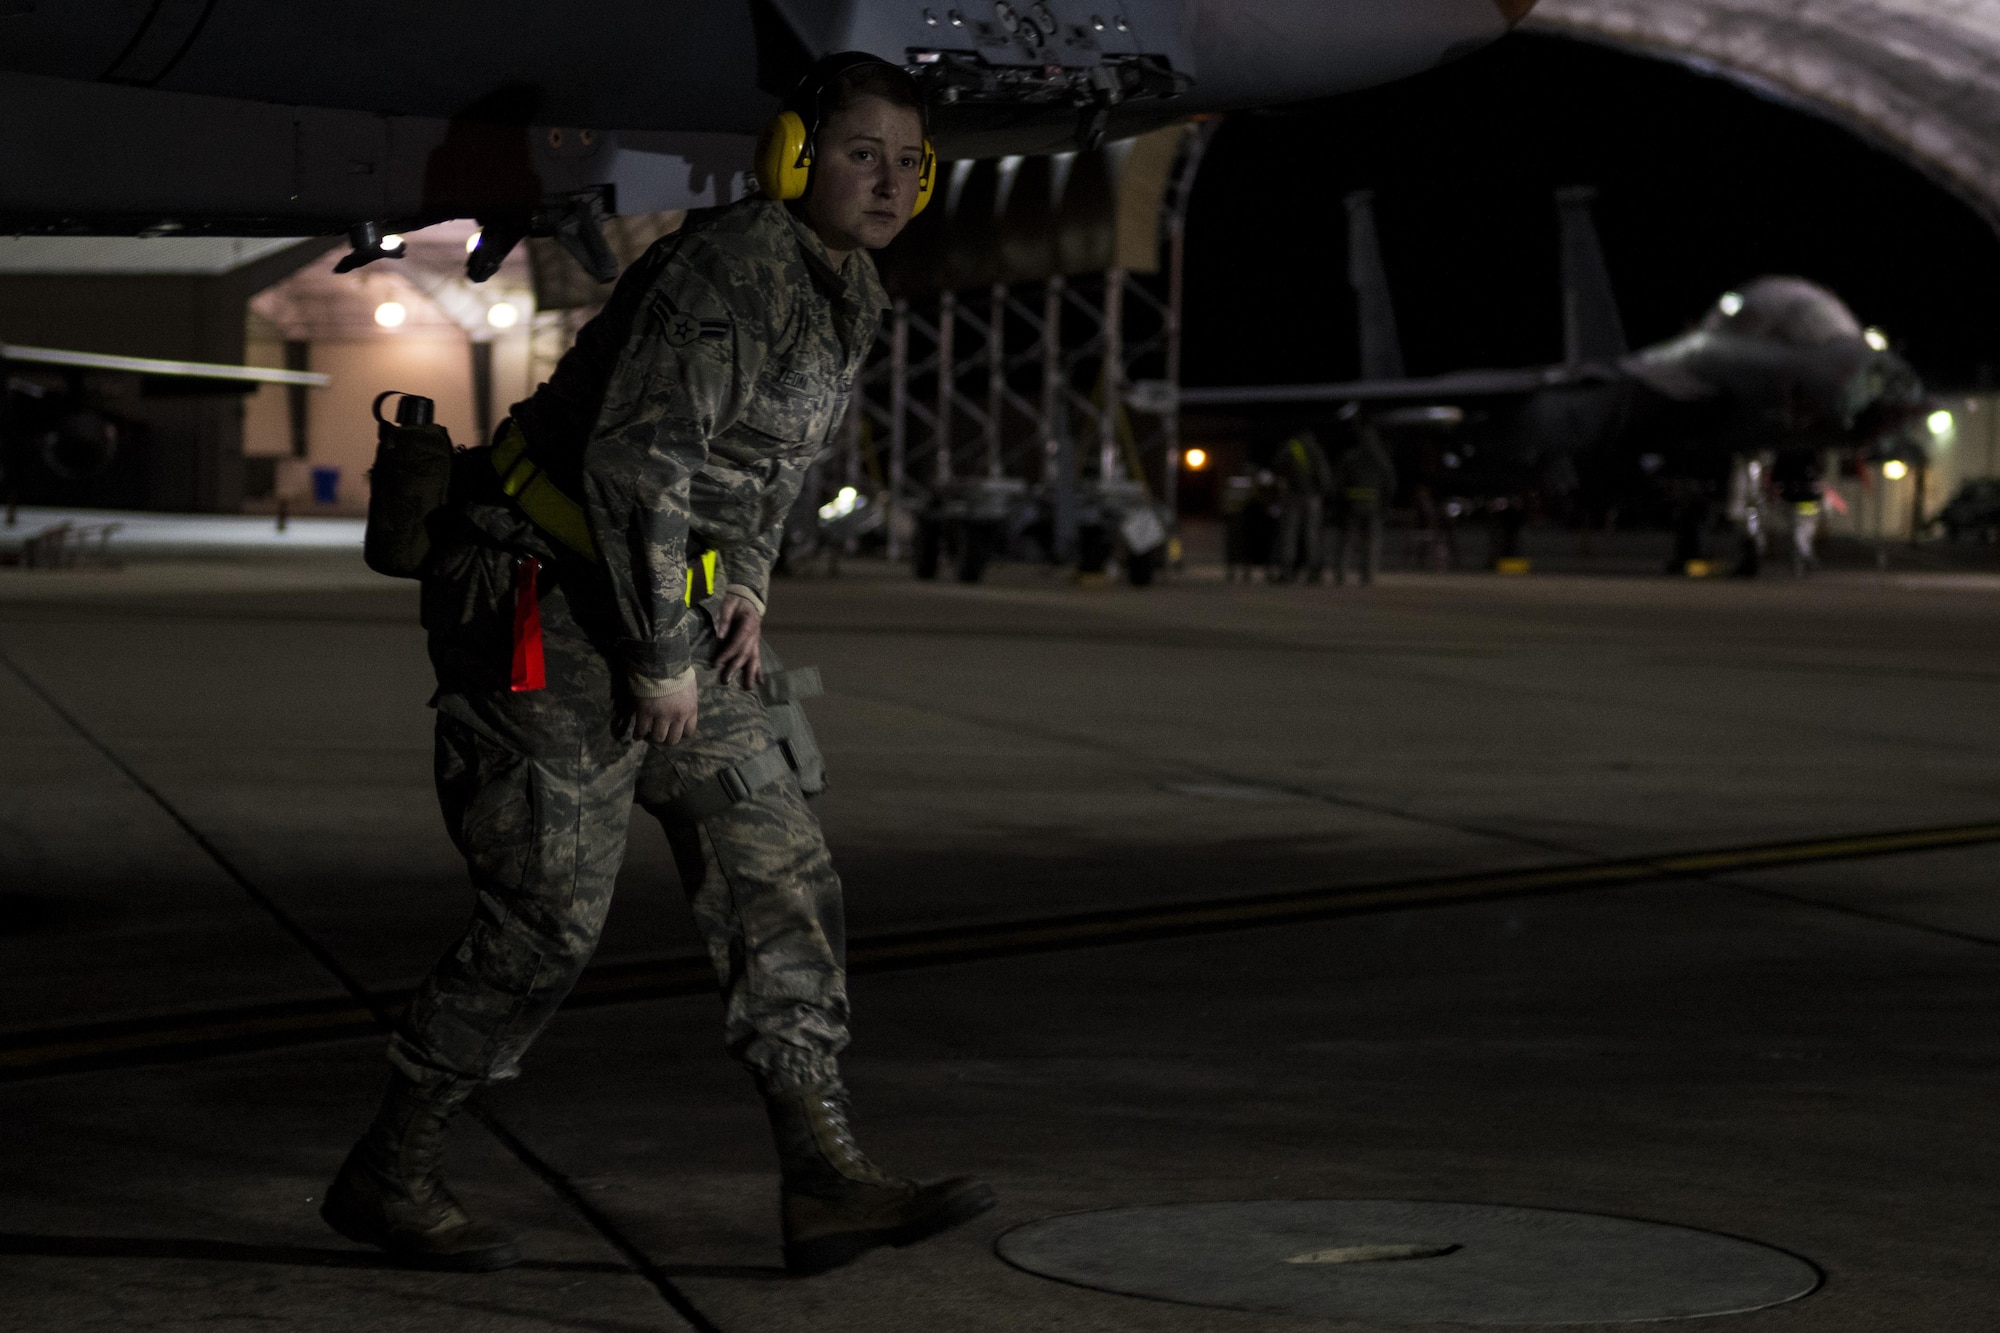 Airman 1st Class Melina Yeoman, 4th Aircraft Maintenance Squadron weapons load crew member, conducts a check on an F-15E Strike Eagle during exercise Coronet Warrior 17-01, Jan. 31, 2017, at Seymour Johnson Air Force Base, North Carolina. 24-hour operations were conducted during the exercise. (U.S. Air Force photo by Airman Shawna L. Keyes)